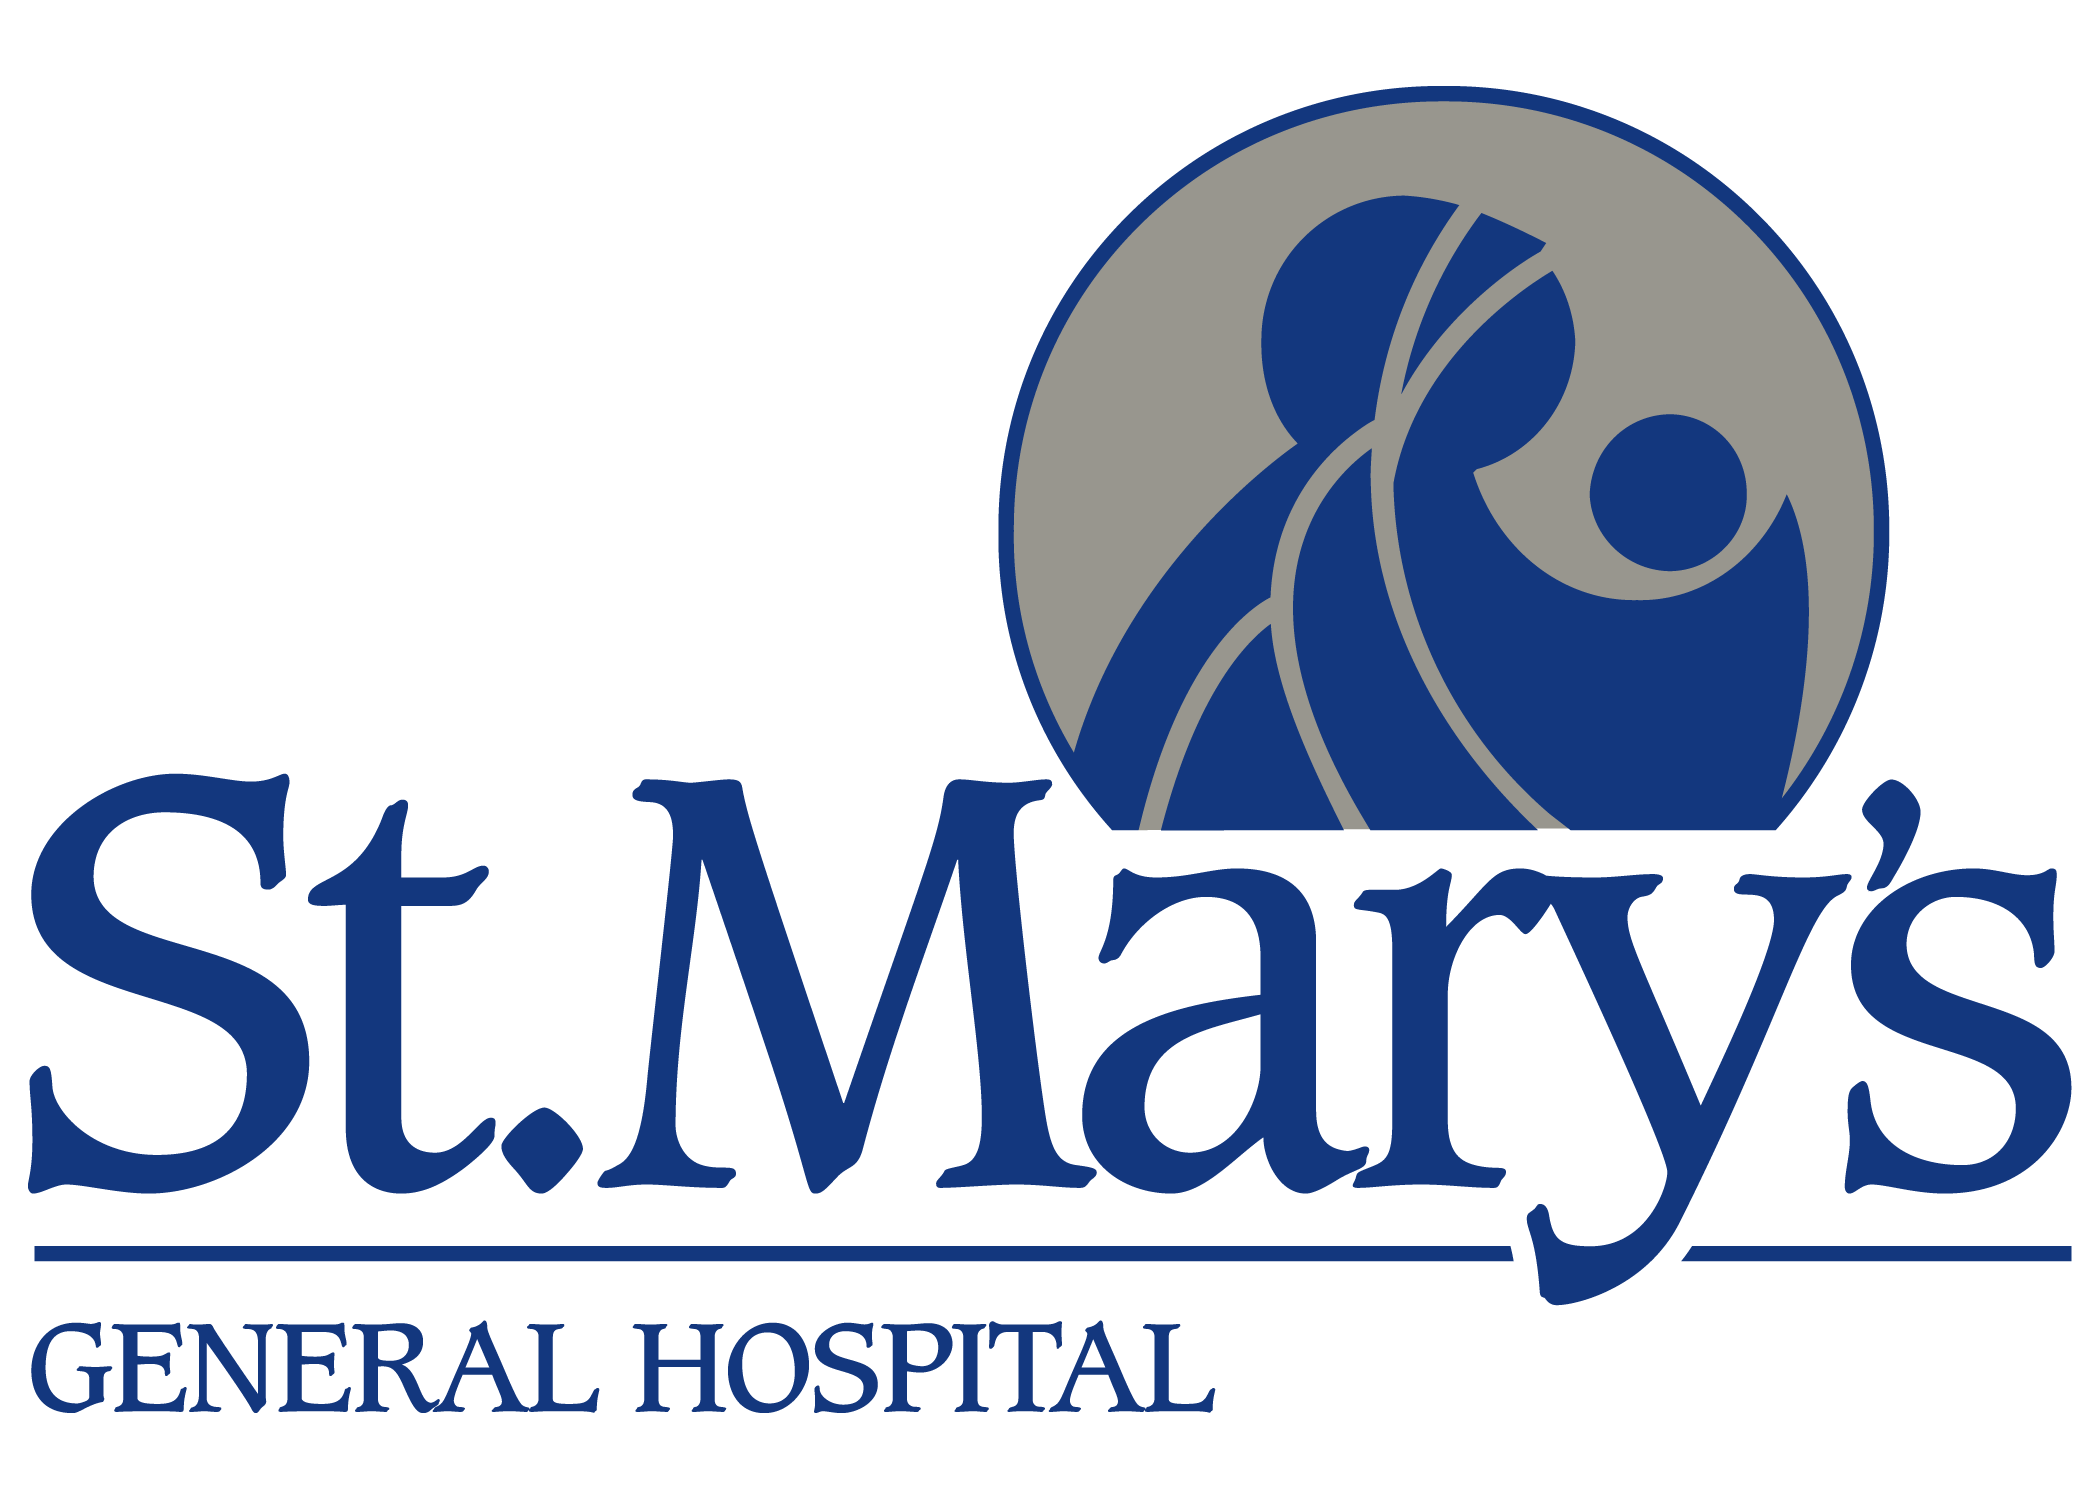 St. mary's General Hospital